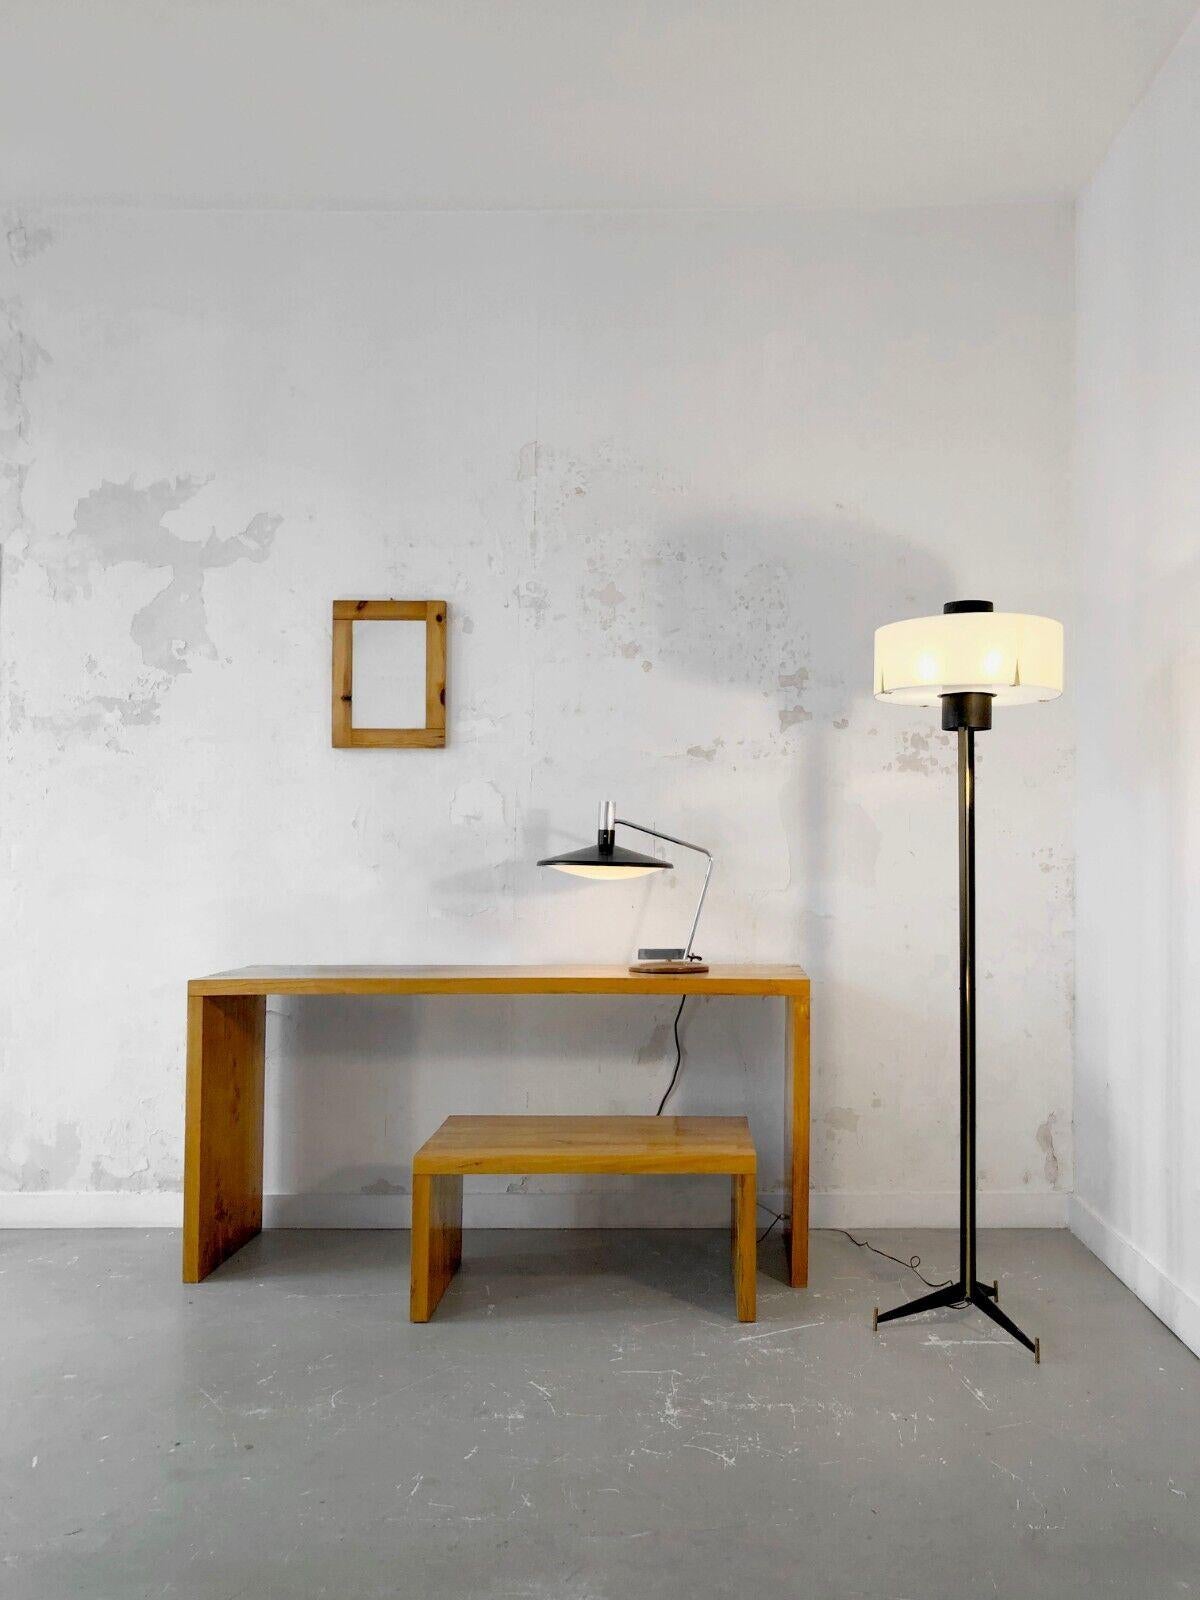 An exceptionnel tripod floor lamp, Modernist, Fifties, Bauhaus, with a tripod base in black lacquered metal on 3 cylindric feet in golden patina brass; the vertical axis in three pieces in black lacquered metal with a golden brass line, crowned with